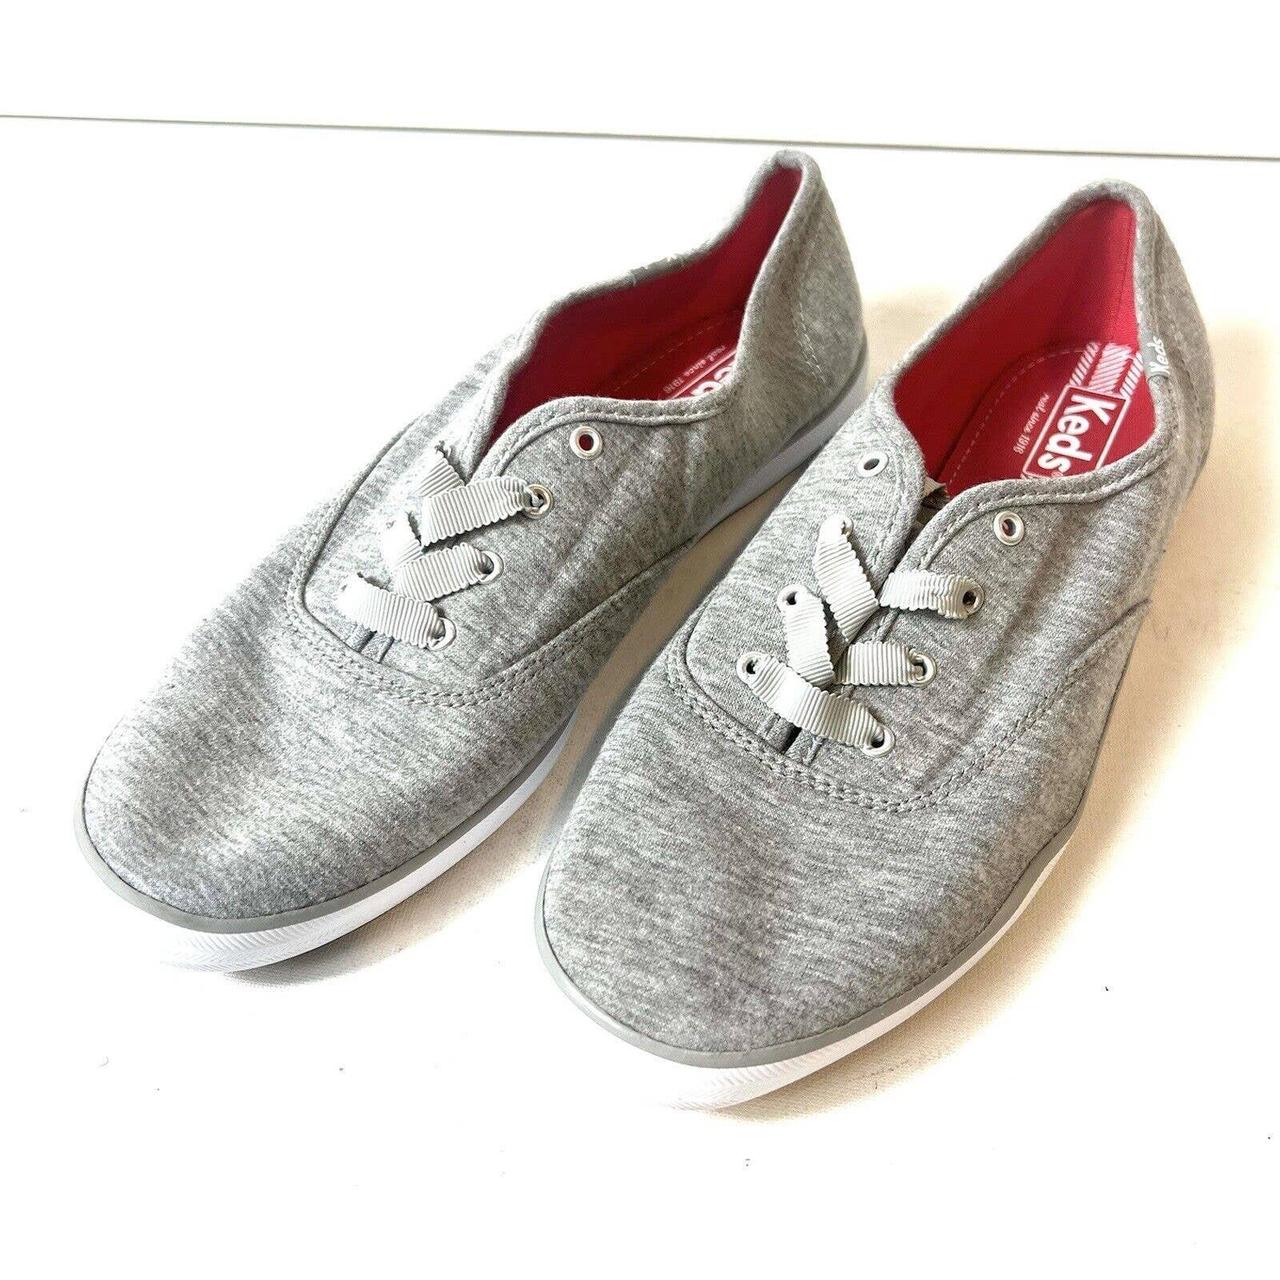 Product Image 2 - Keds Classic Women's Sneaker Shoes